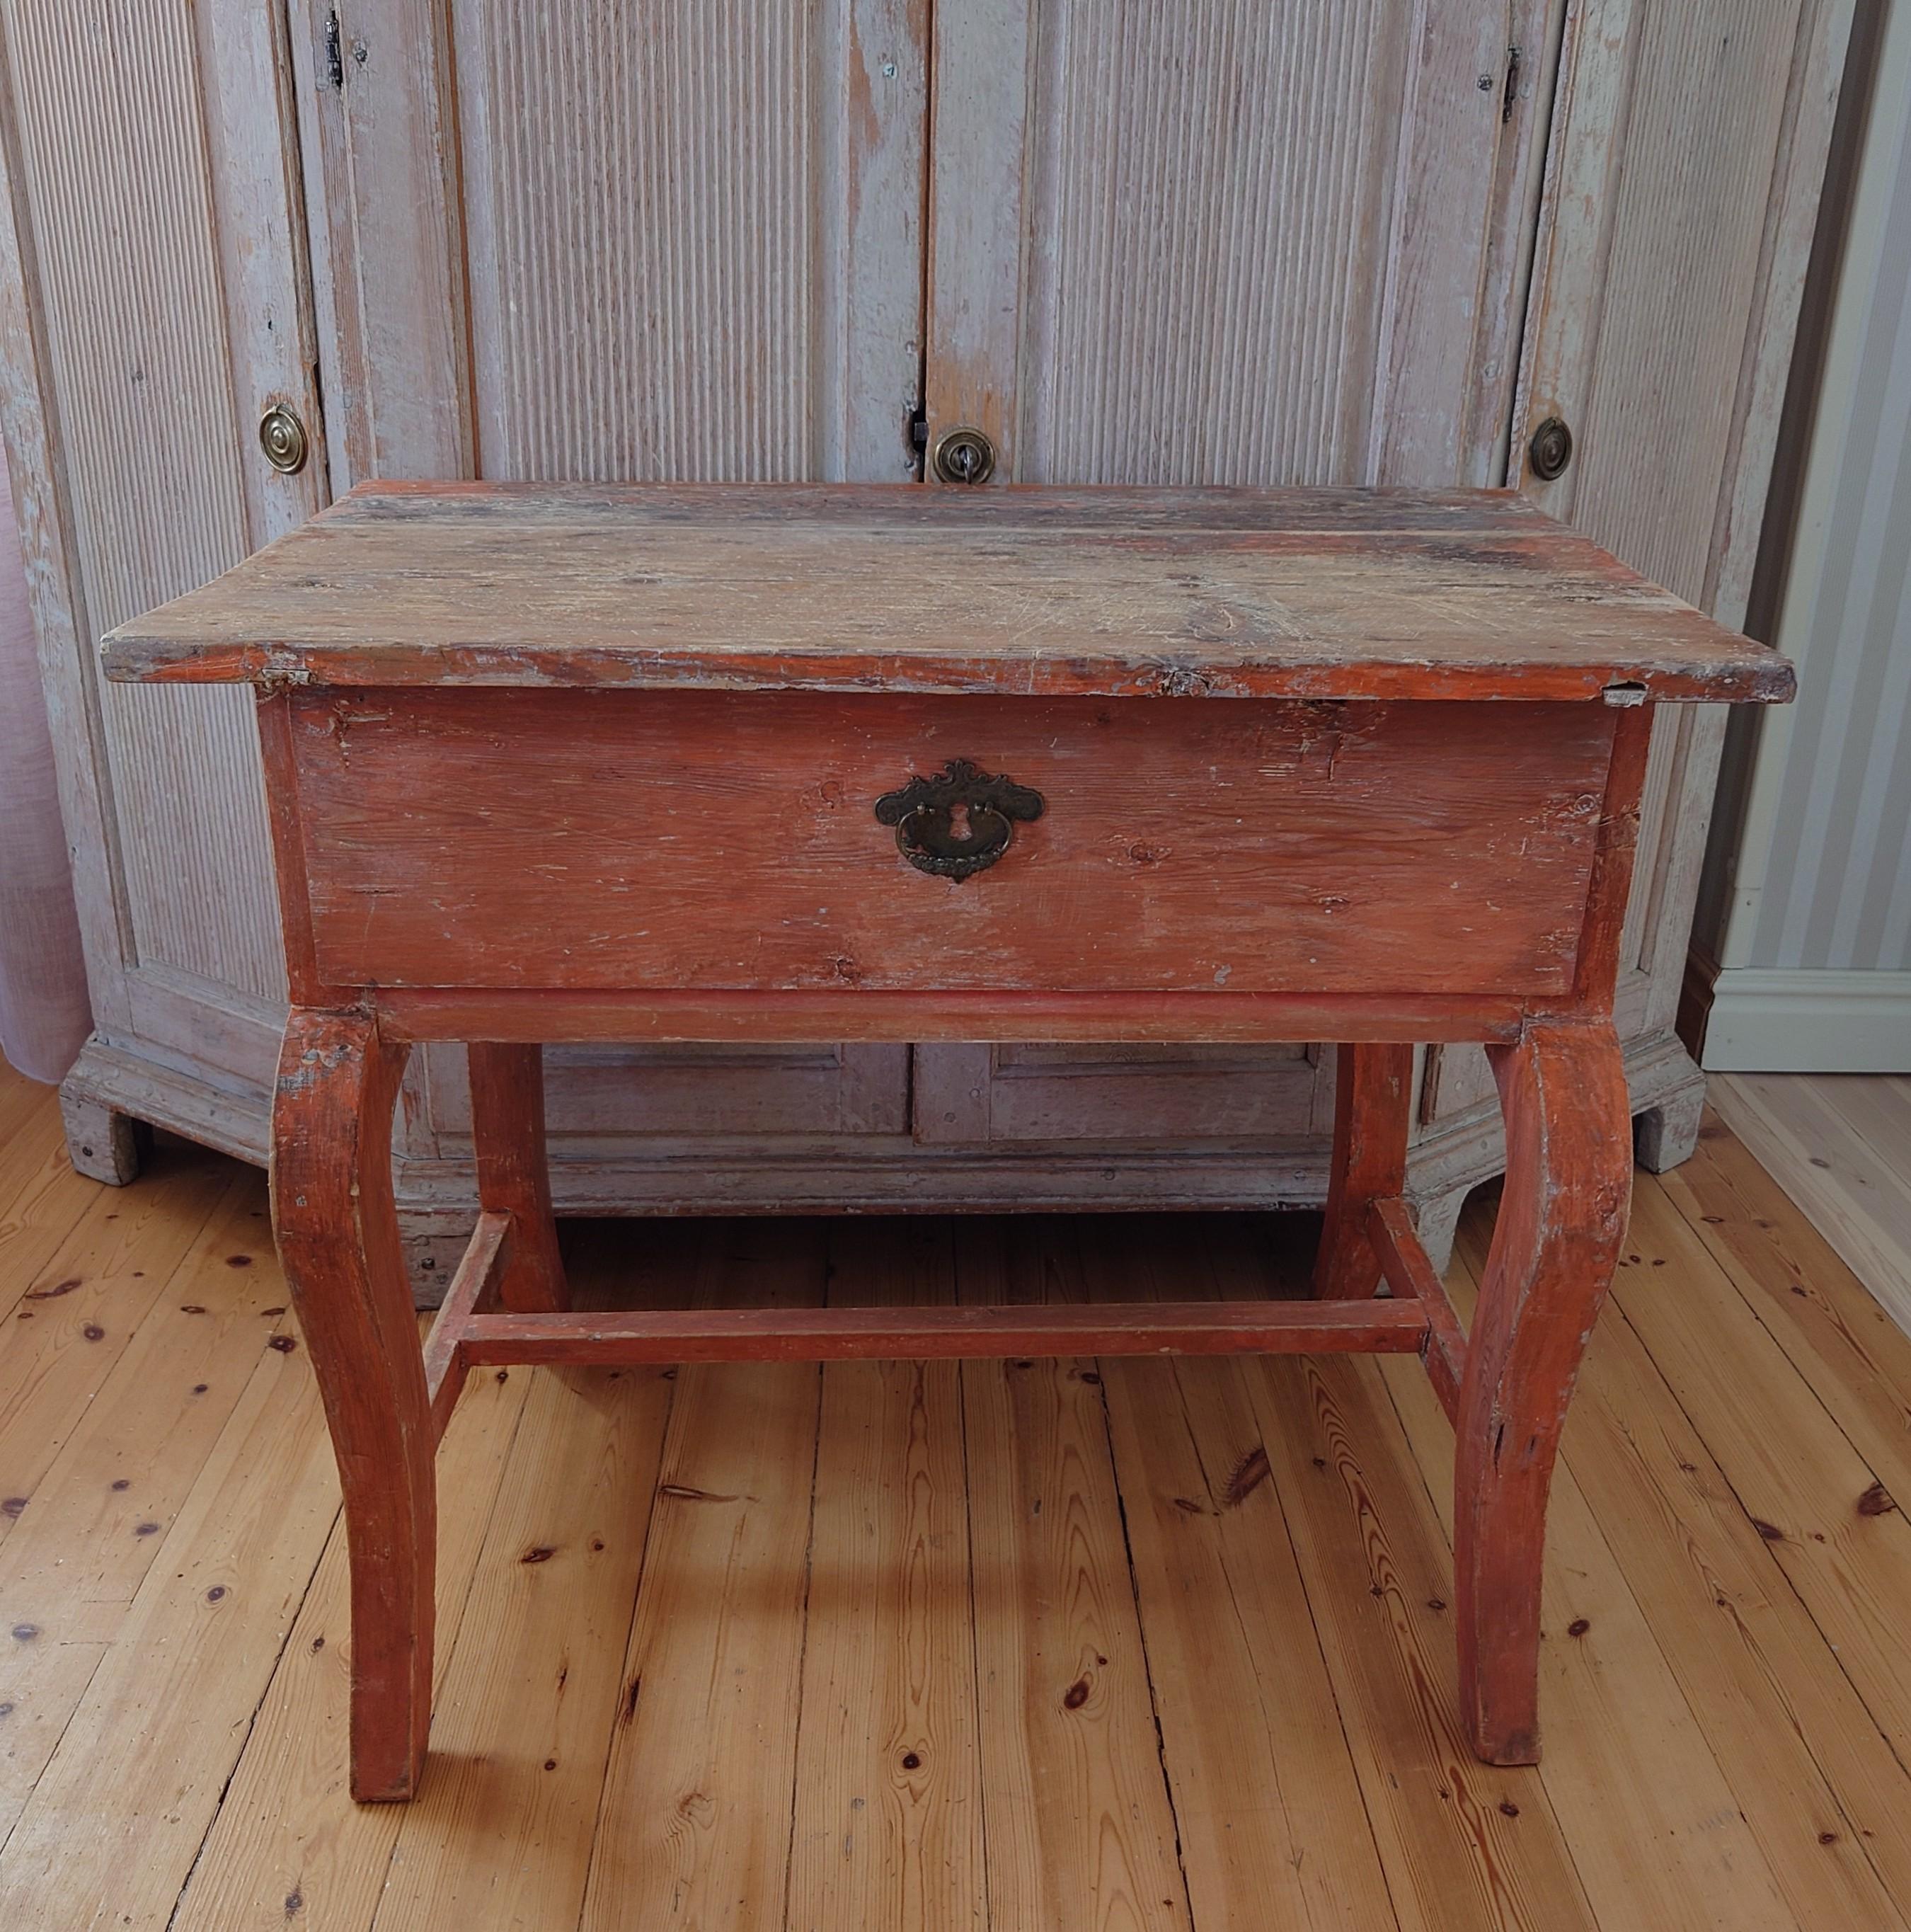 Charming small folk art table from Önsköldsvik, Northern Sweden . It’s completely hand-made in Swedish pine and every detail is carefully considered. Made during the early 1800s, around 1810, the table has some wear and distress after time and use.